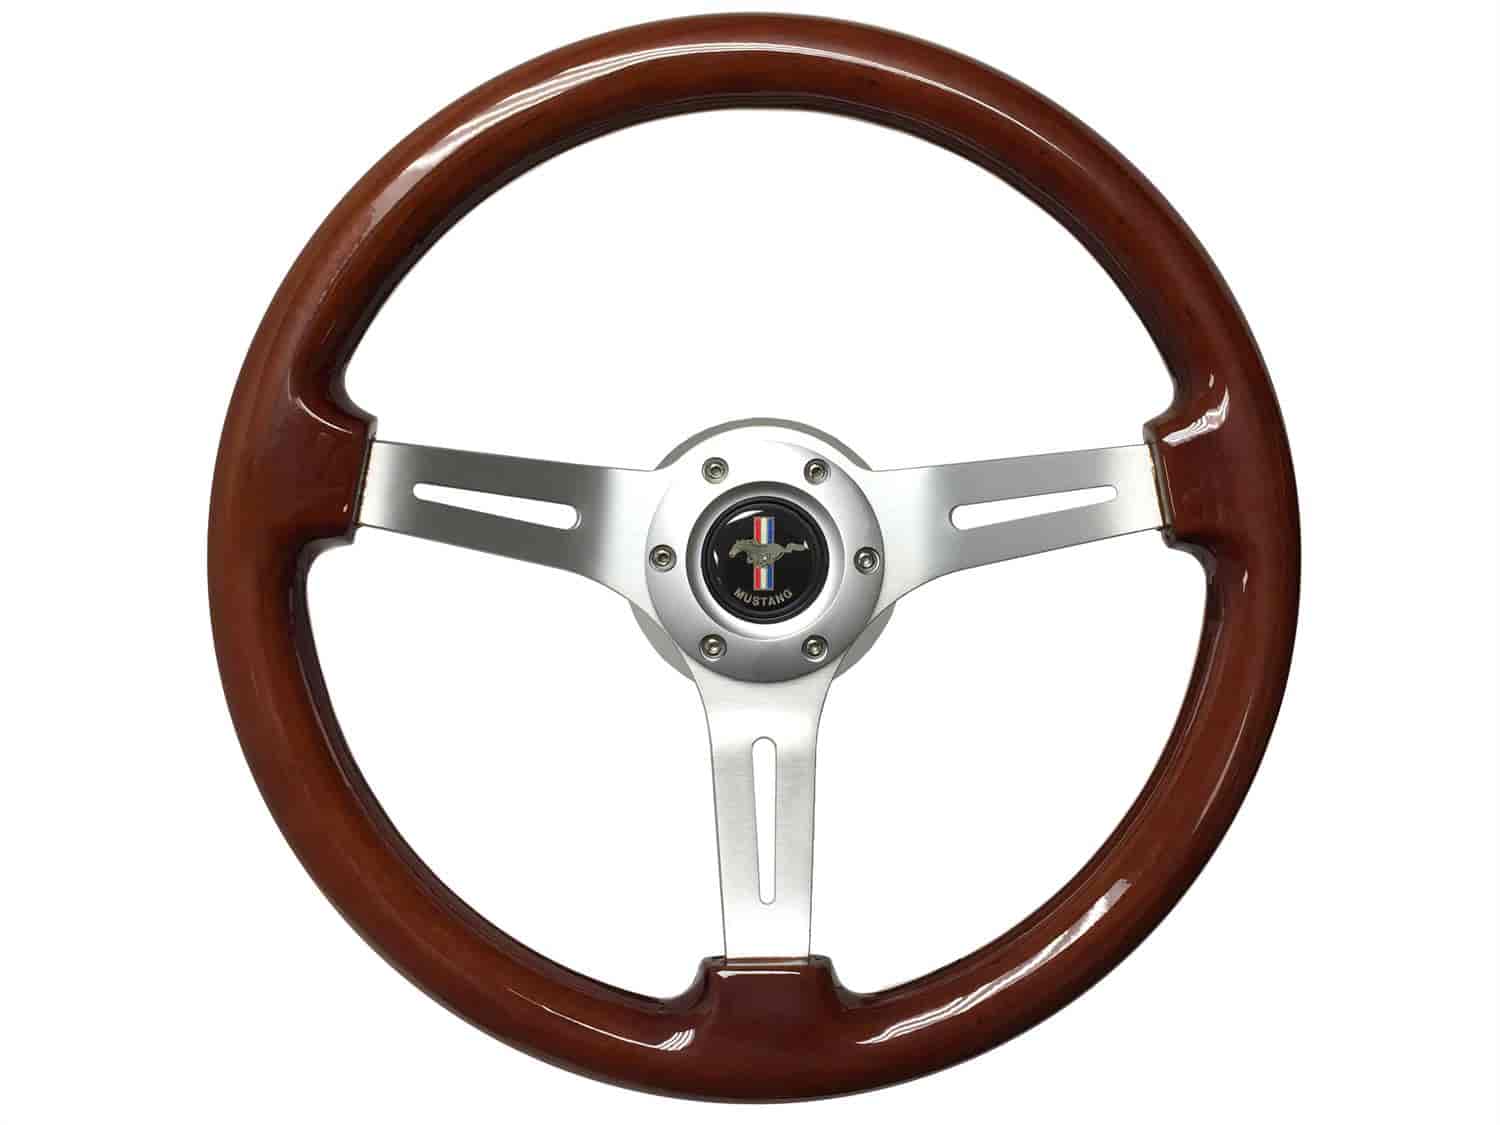 S6 Sport Steering Wheel Kit for 1984-2004 Ford Mustang, 14 in. Diameter, Mahogany Wood Grip, with 6-Bolt Adapter and Horn Button